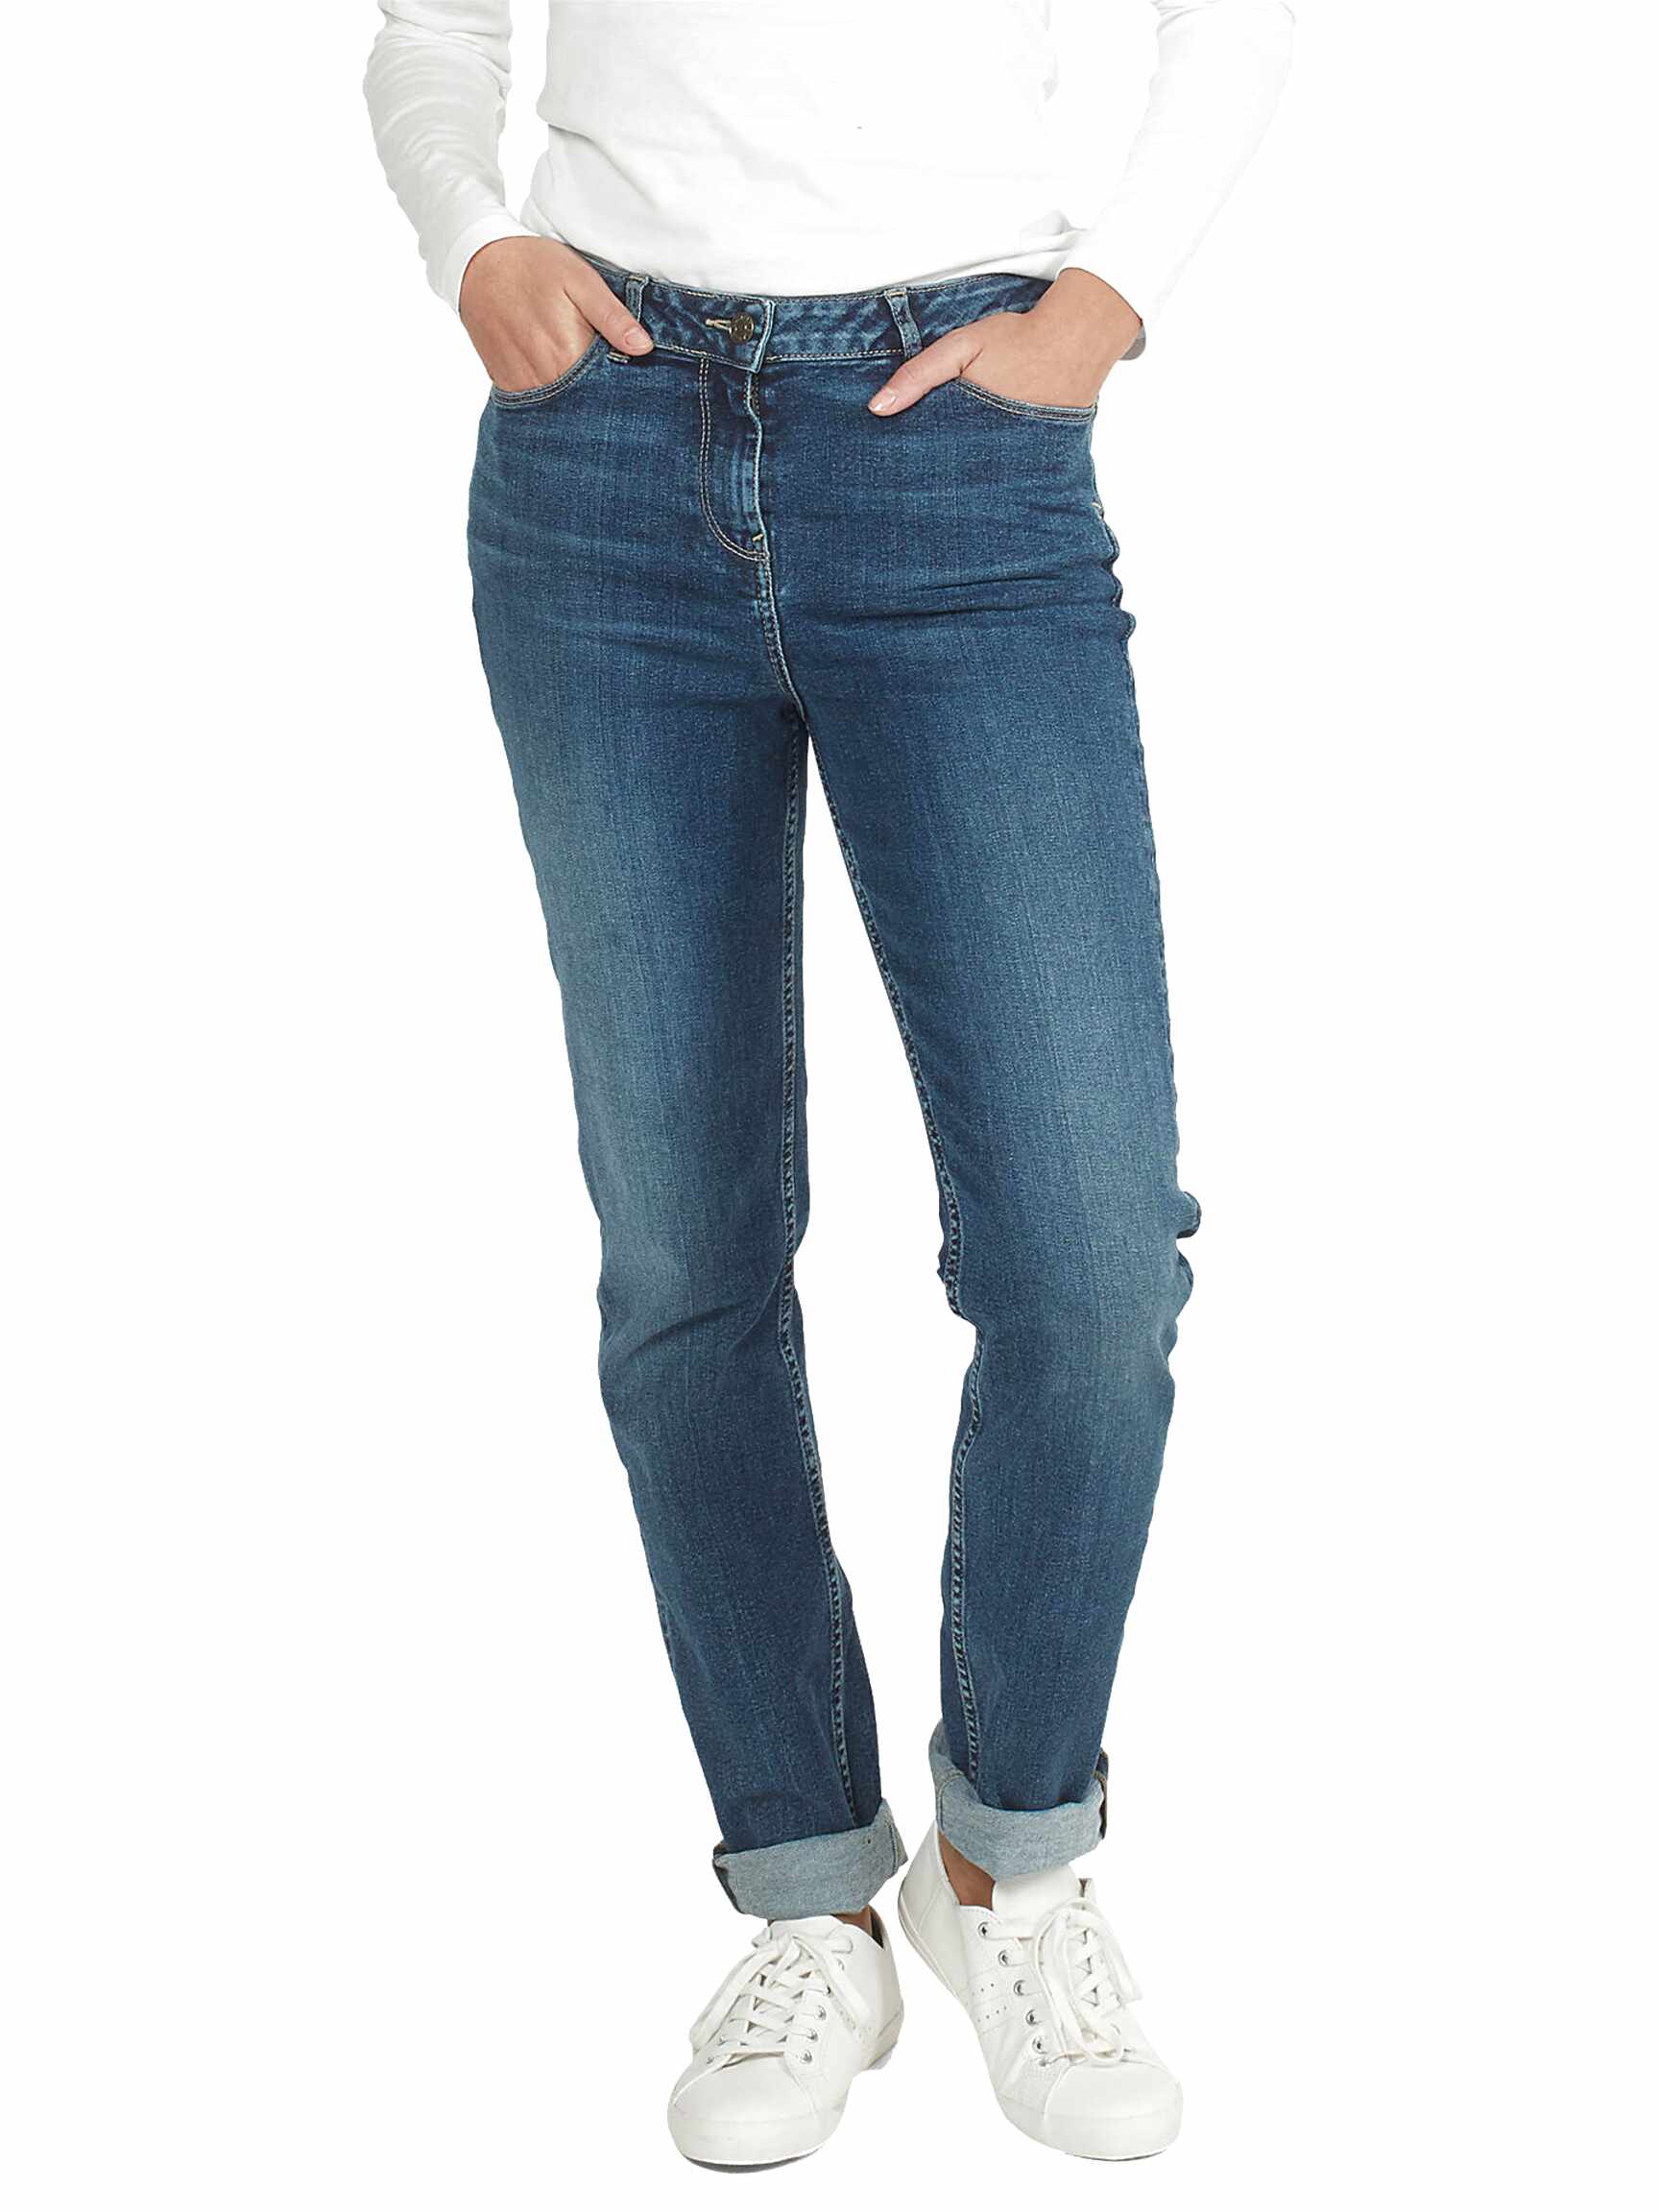 Fat Face Jeans for sale in UK | 73 used Fat Face Jeans